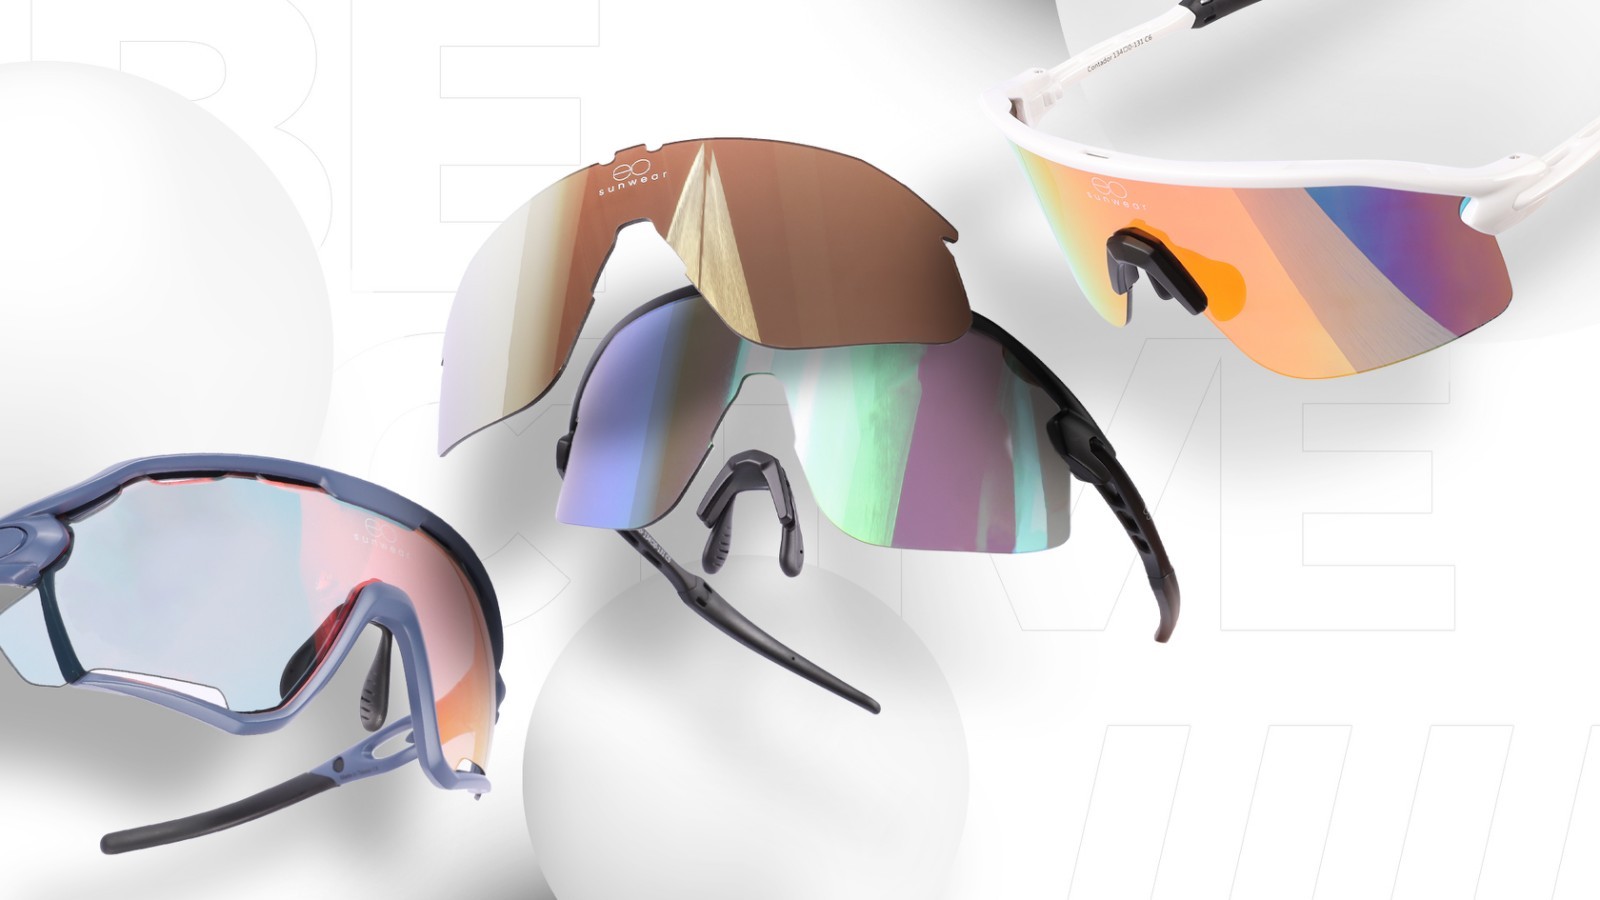 Executive Optical Launches New Collection of Sunglasses​